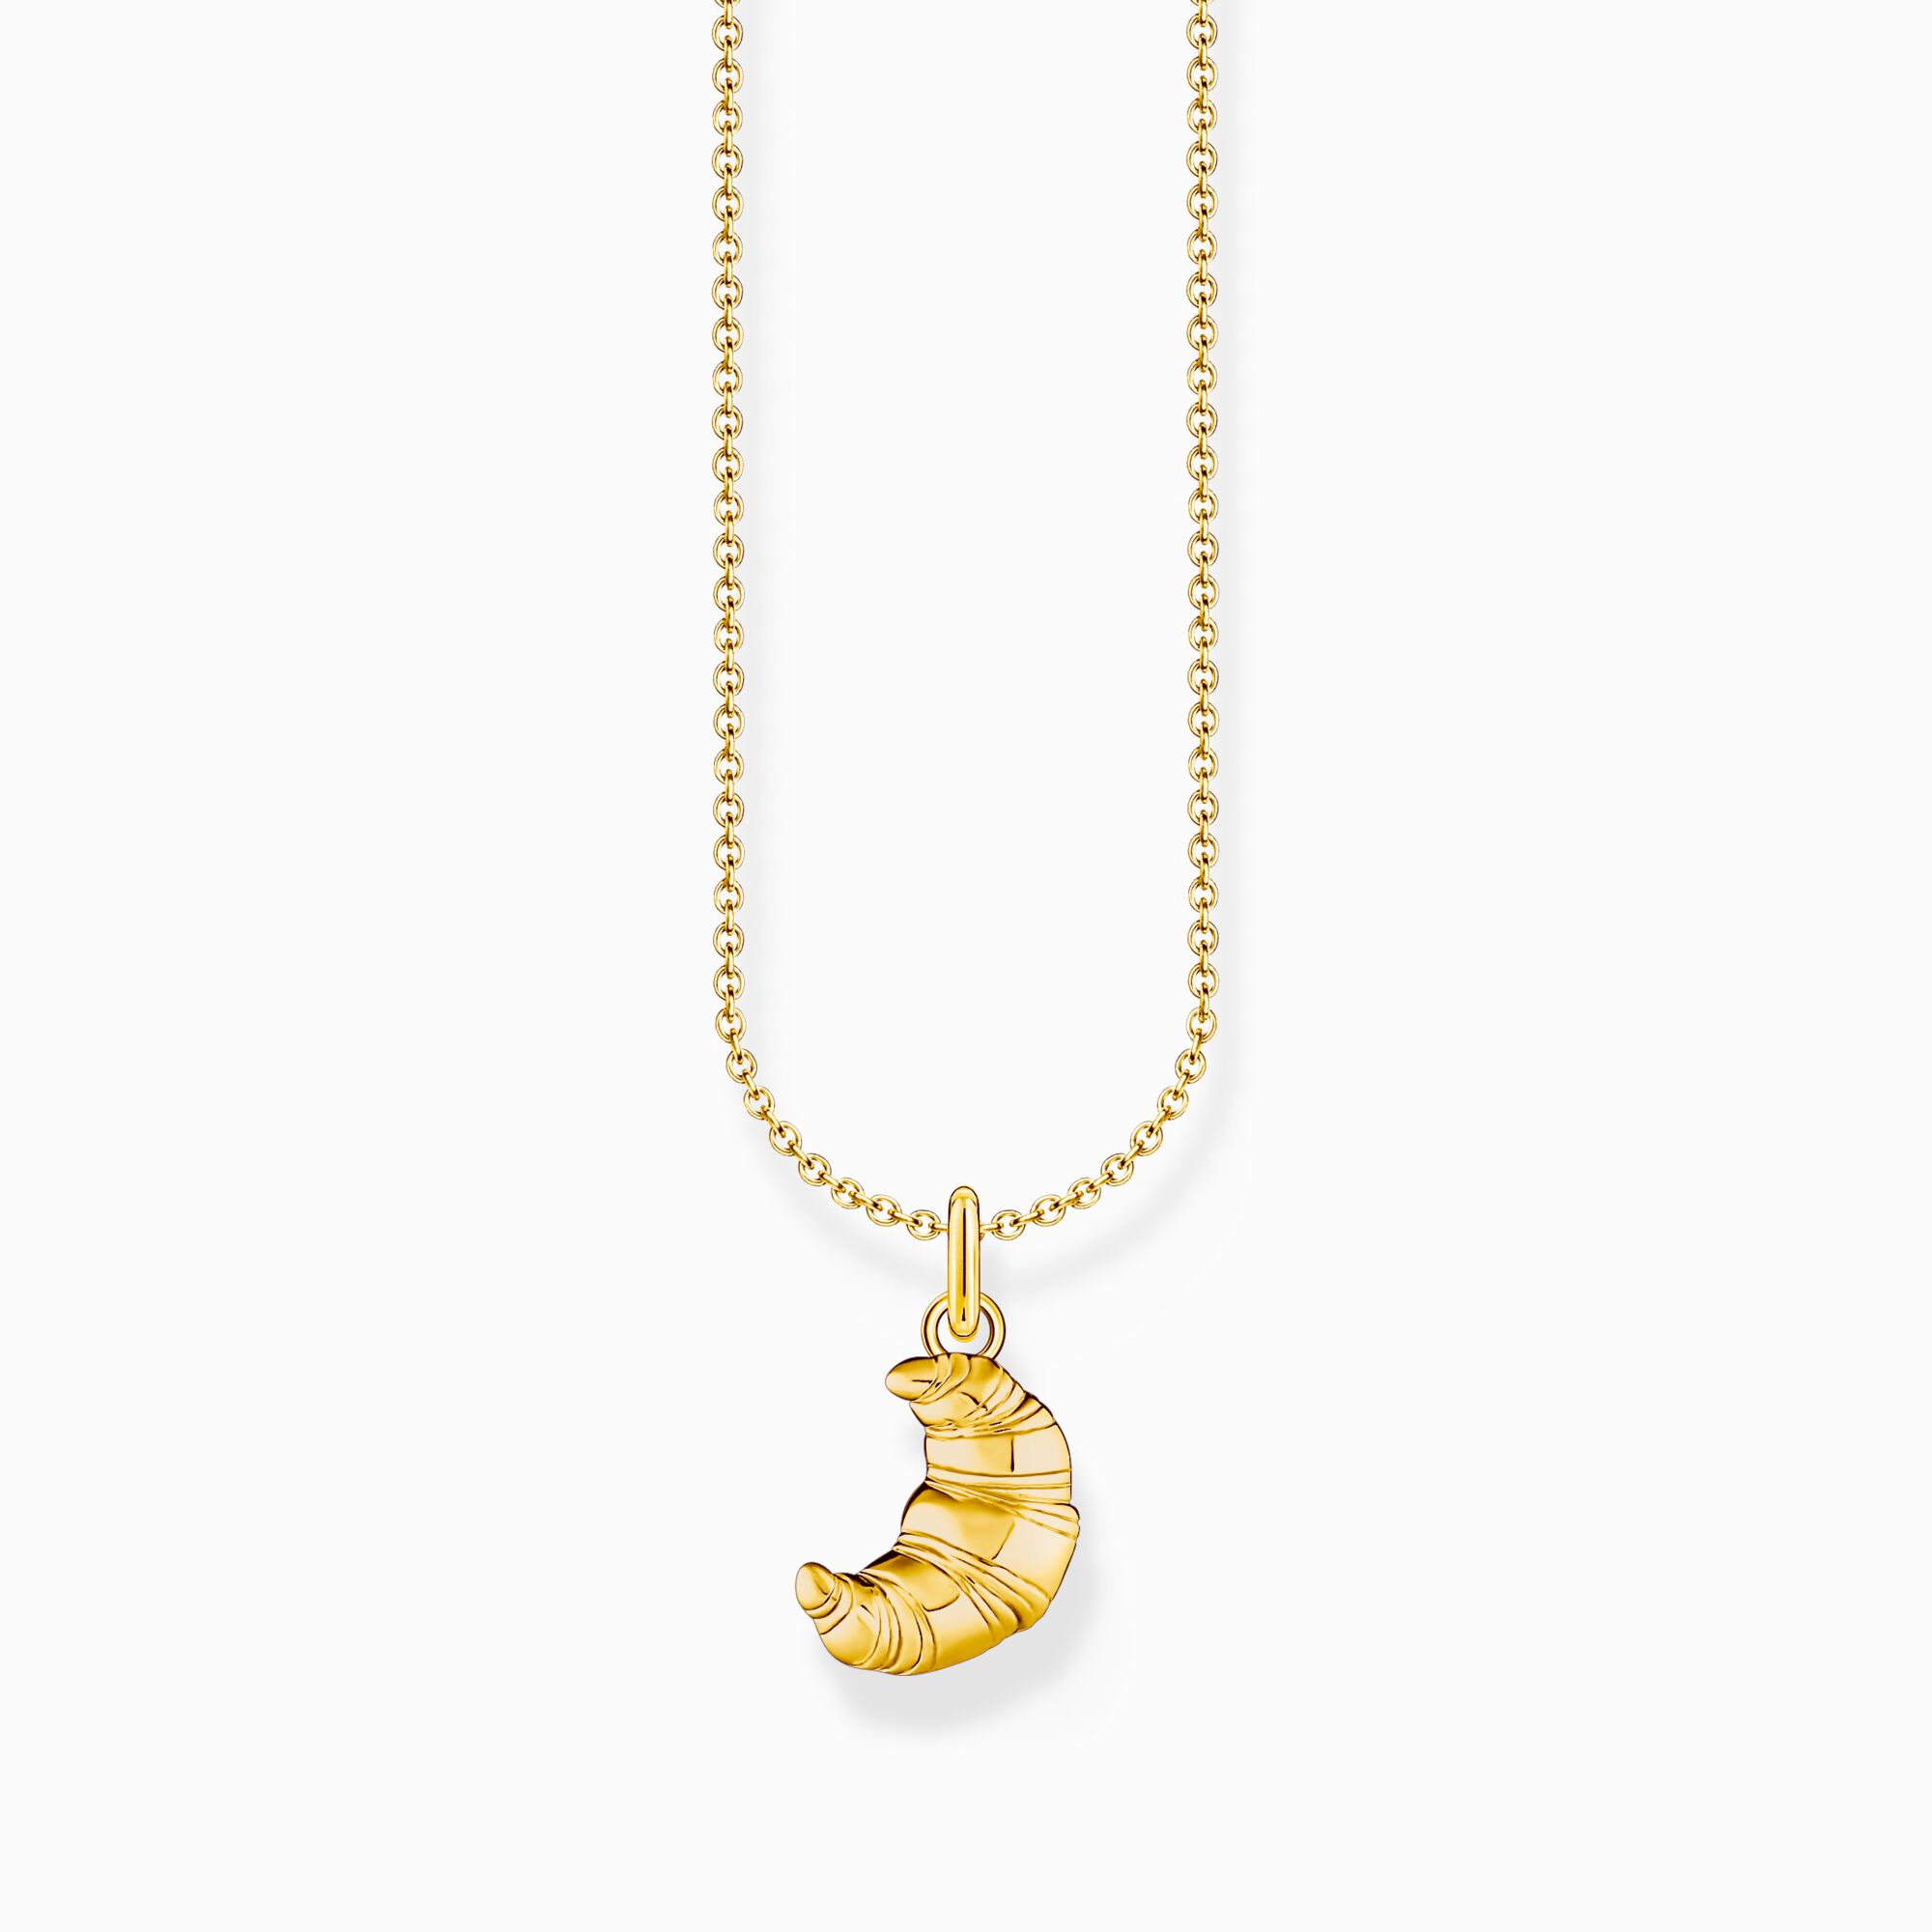 Gold-plated necklace with croissant pendant from the Charming Collection collection in the THOMAS SABO online store